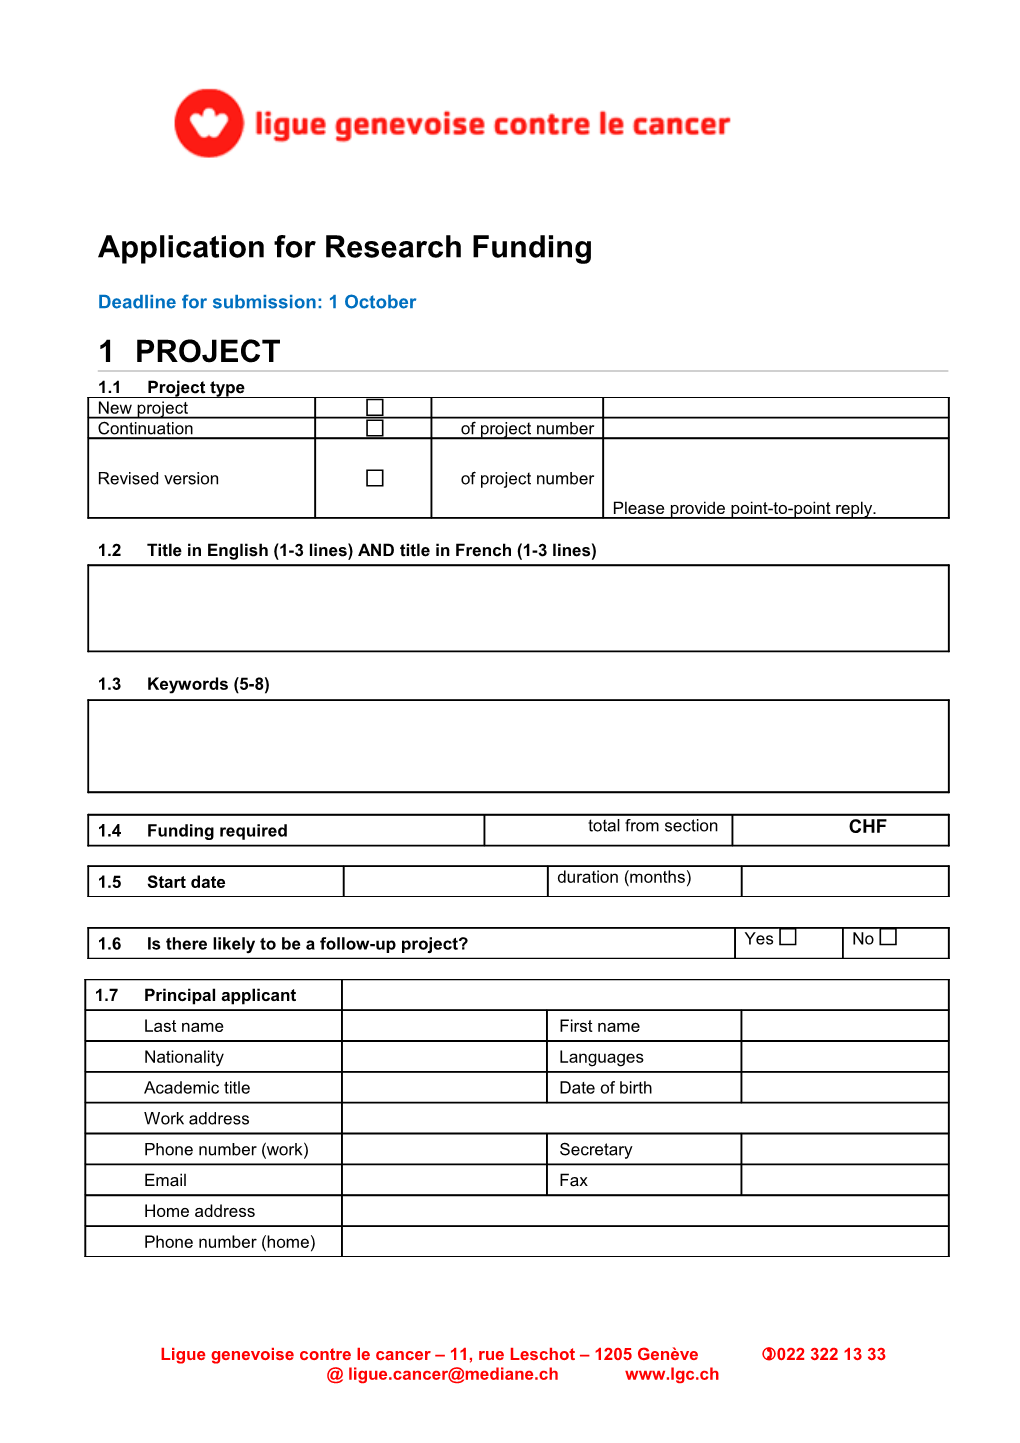 Application for Research Funding